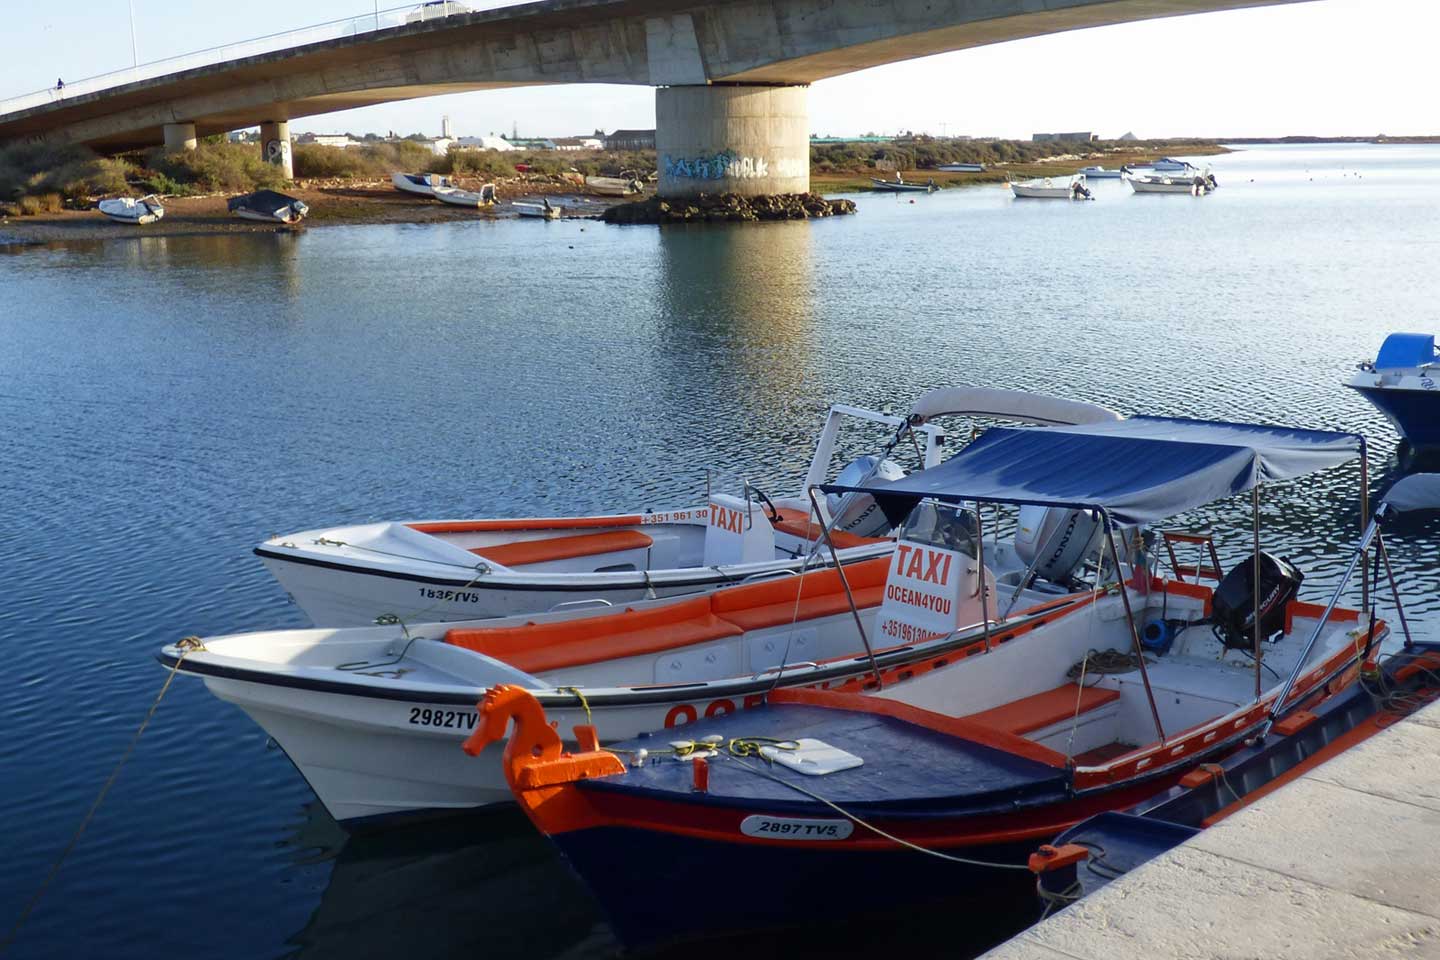 A photo of water taxis moored on the Gilao River in Tavira